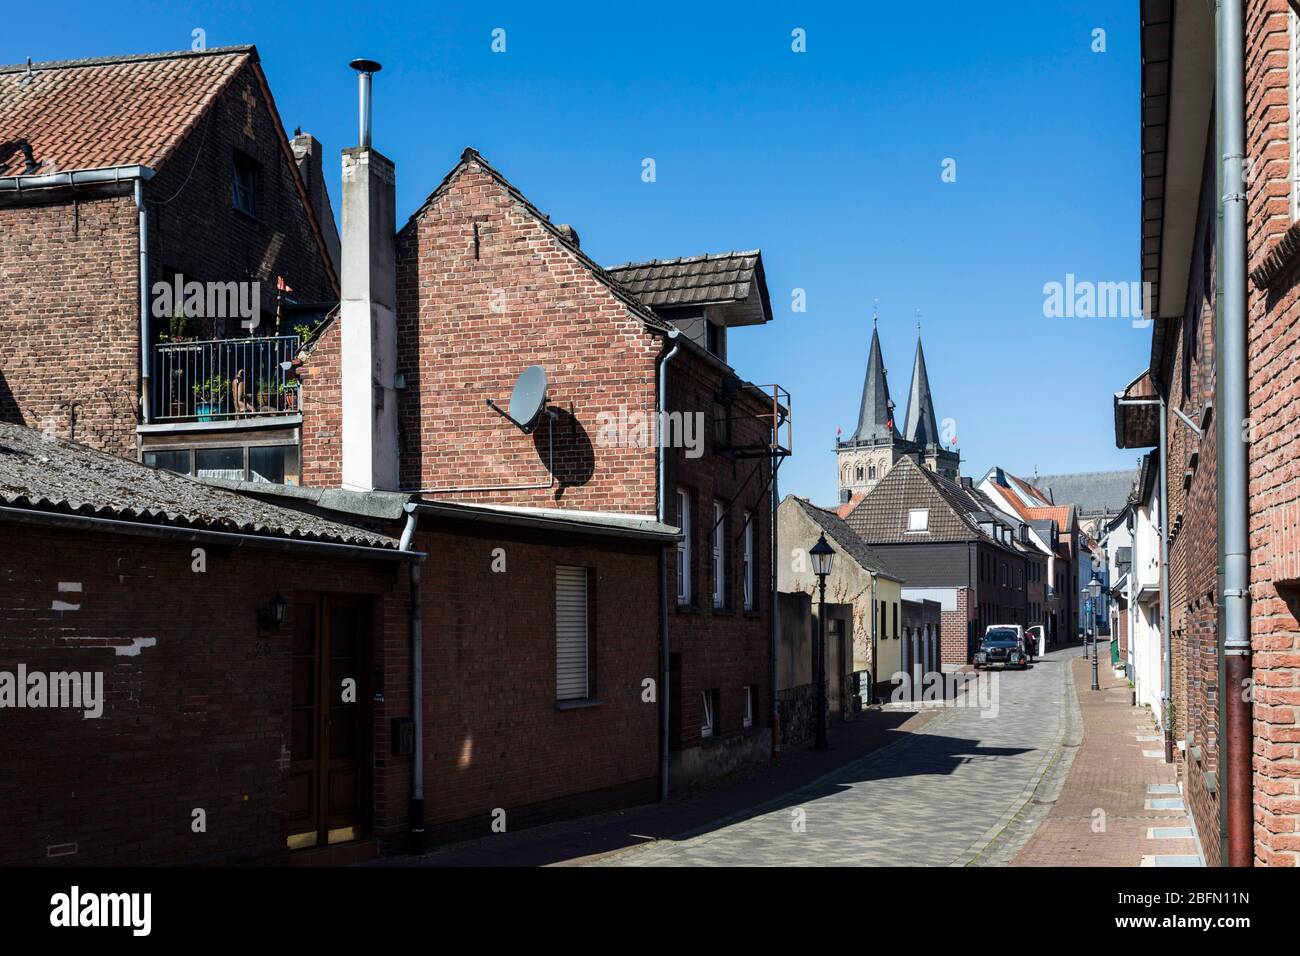 Historic old town with the St. Victor's church in the background Stock Photo